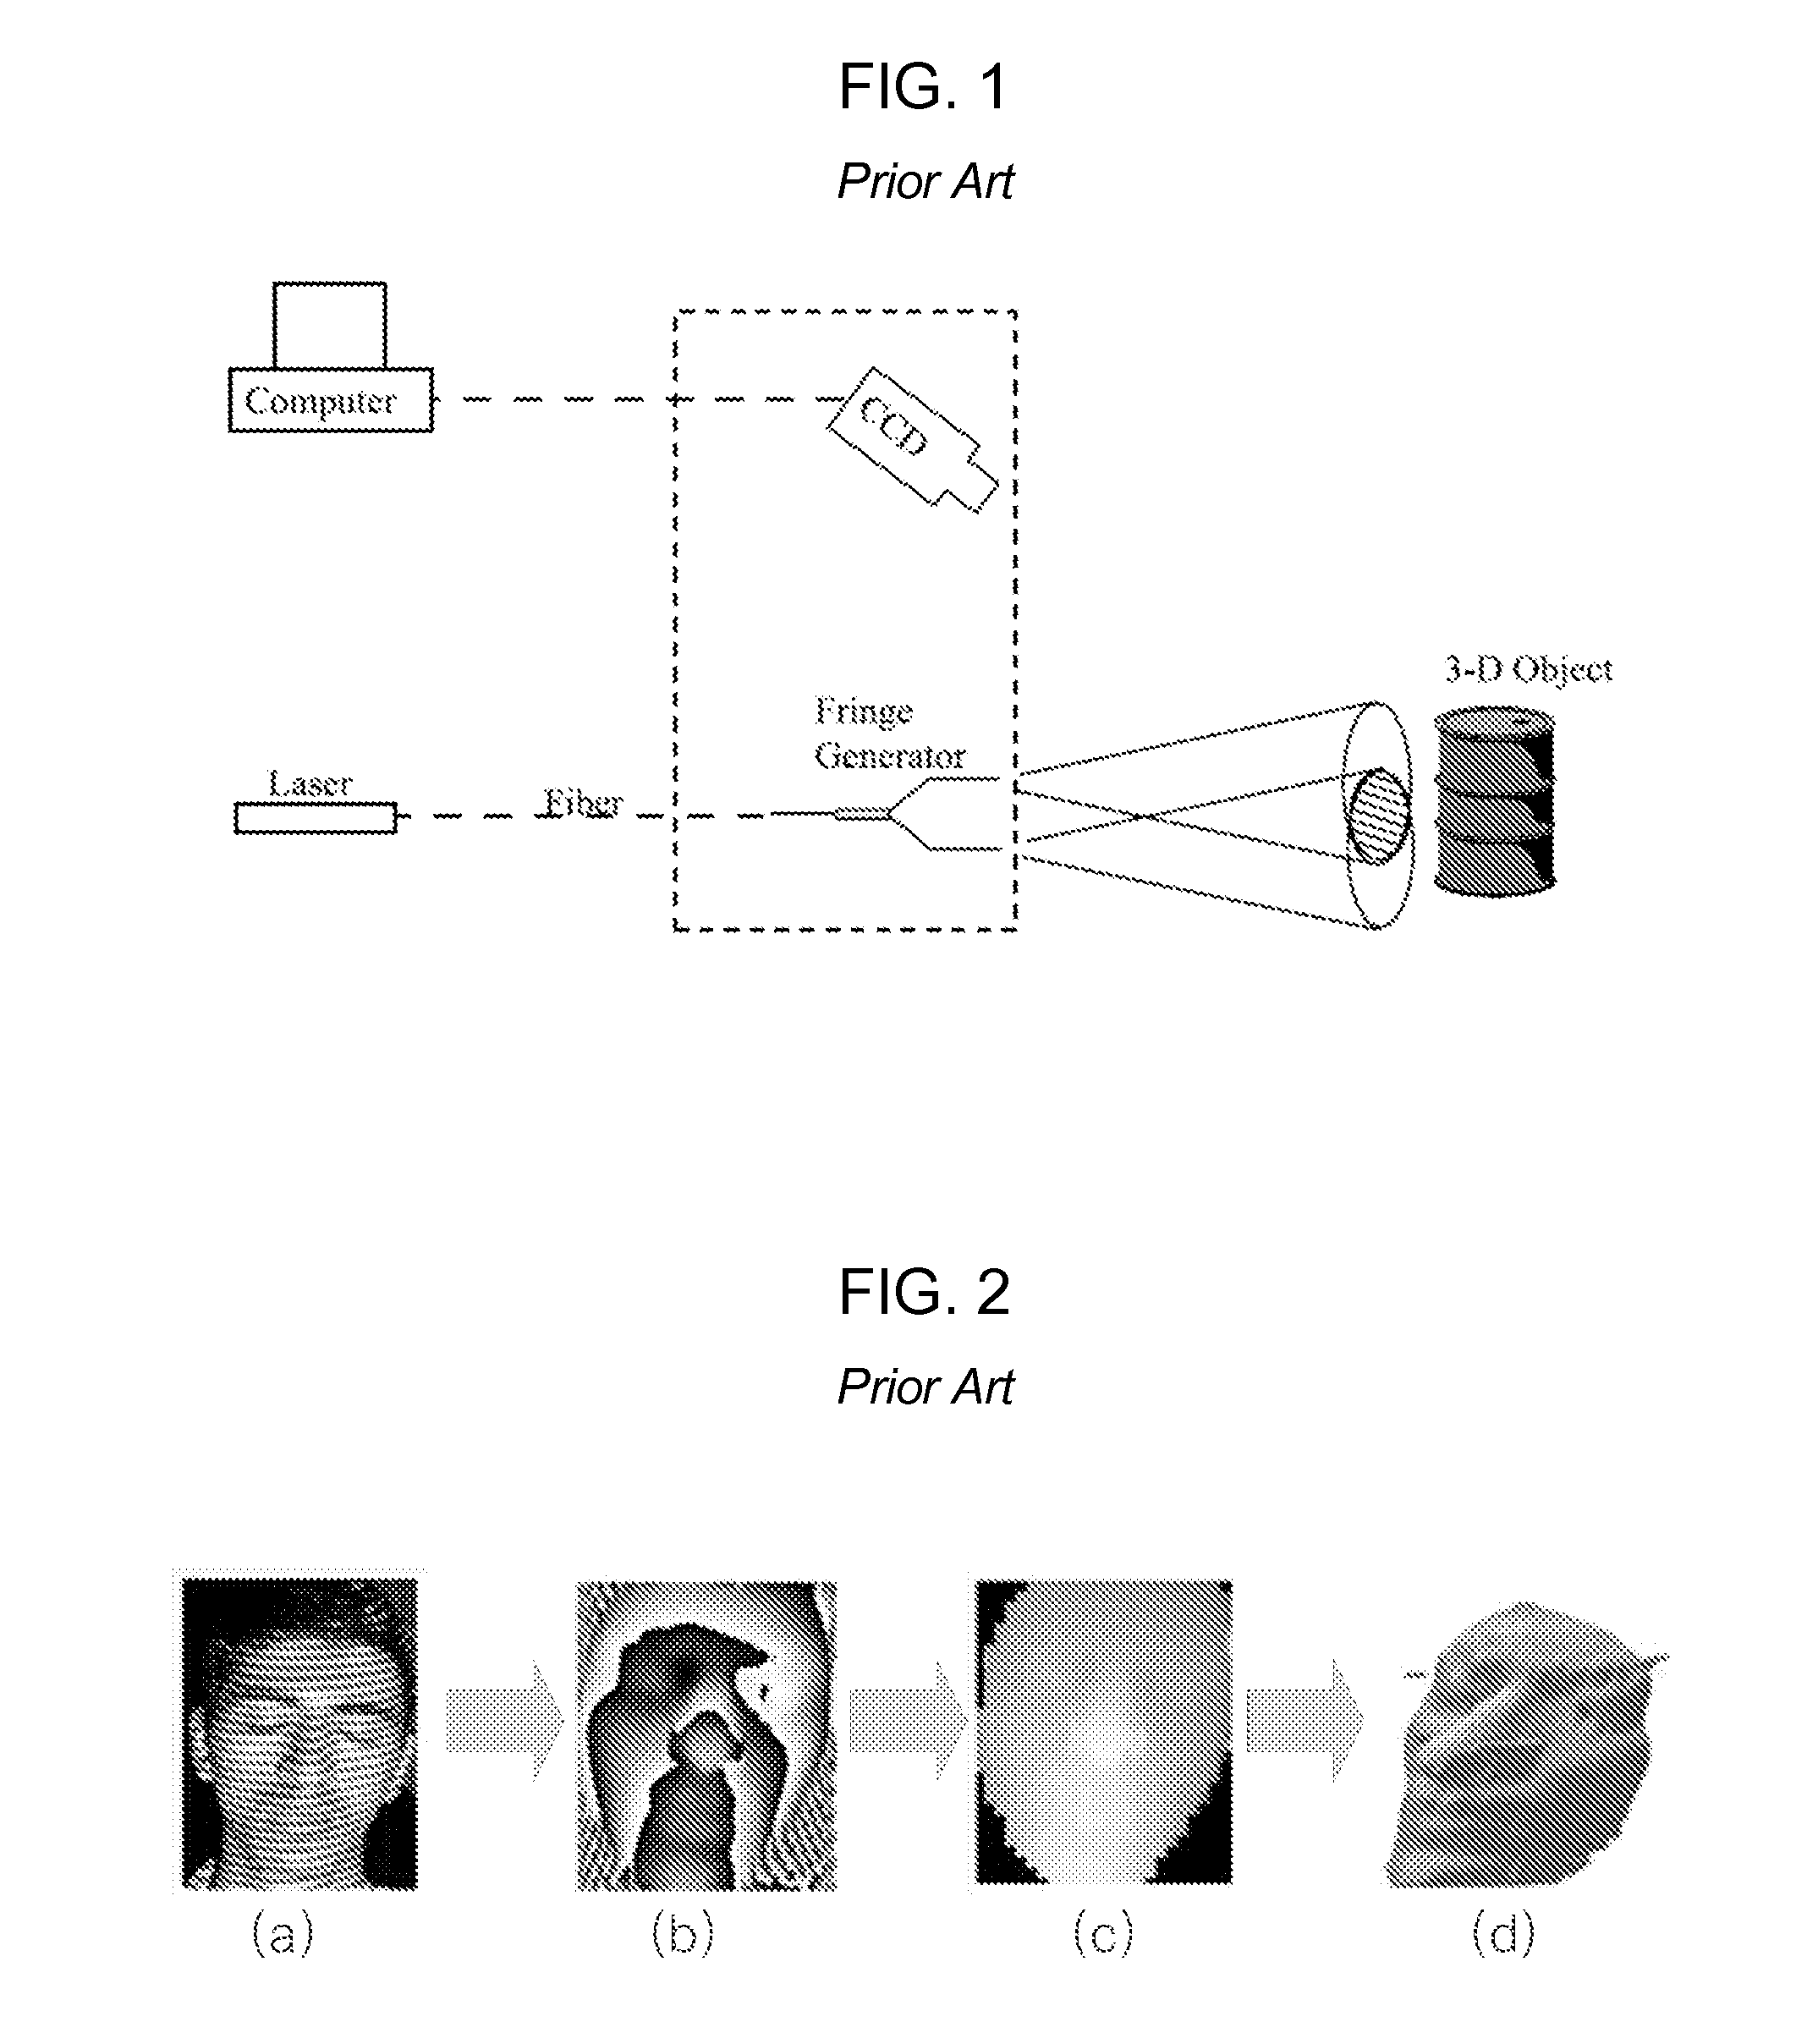 Optical profilometer using liquid crystal fabry-perot to project fringe pattern